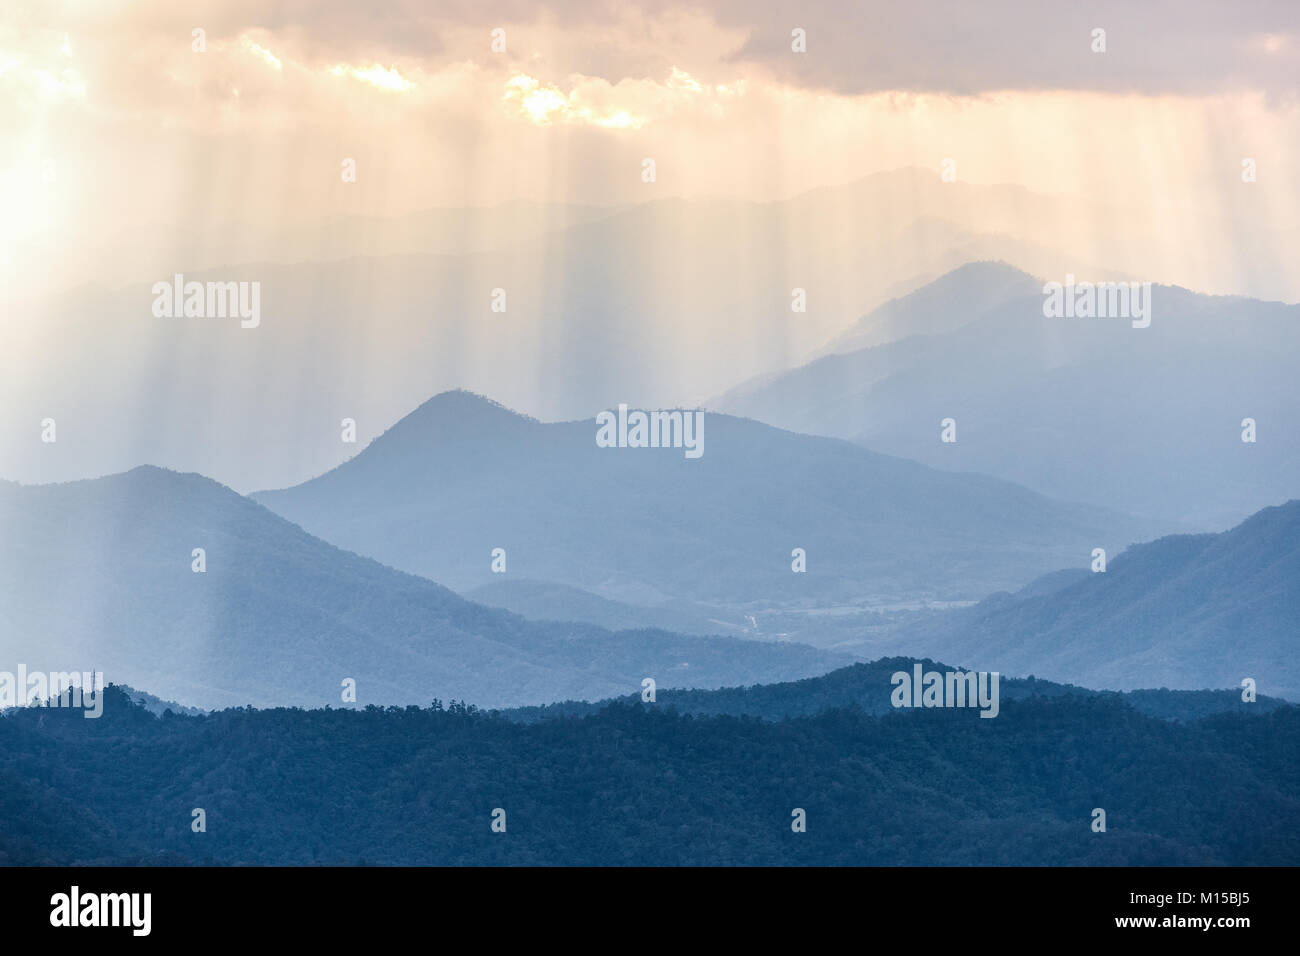 Sunbeam from cloudy sky shining through fog to blue complex mountains range in morning after very cold night of winter season. Stock Photo